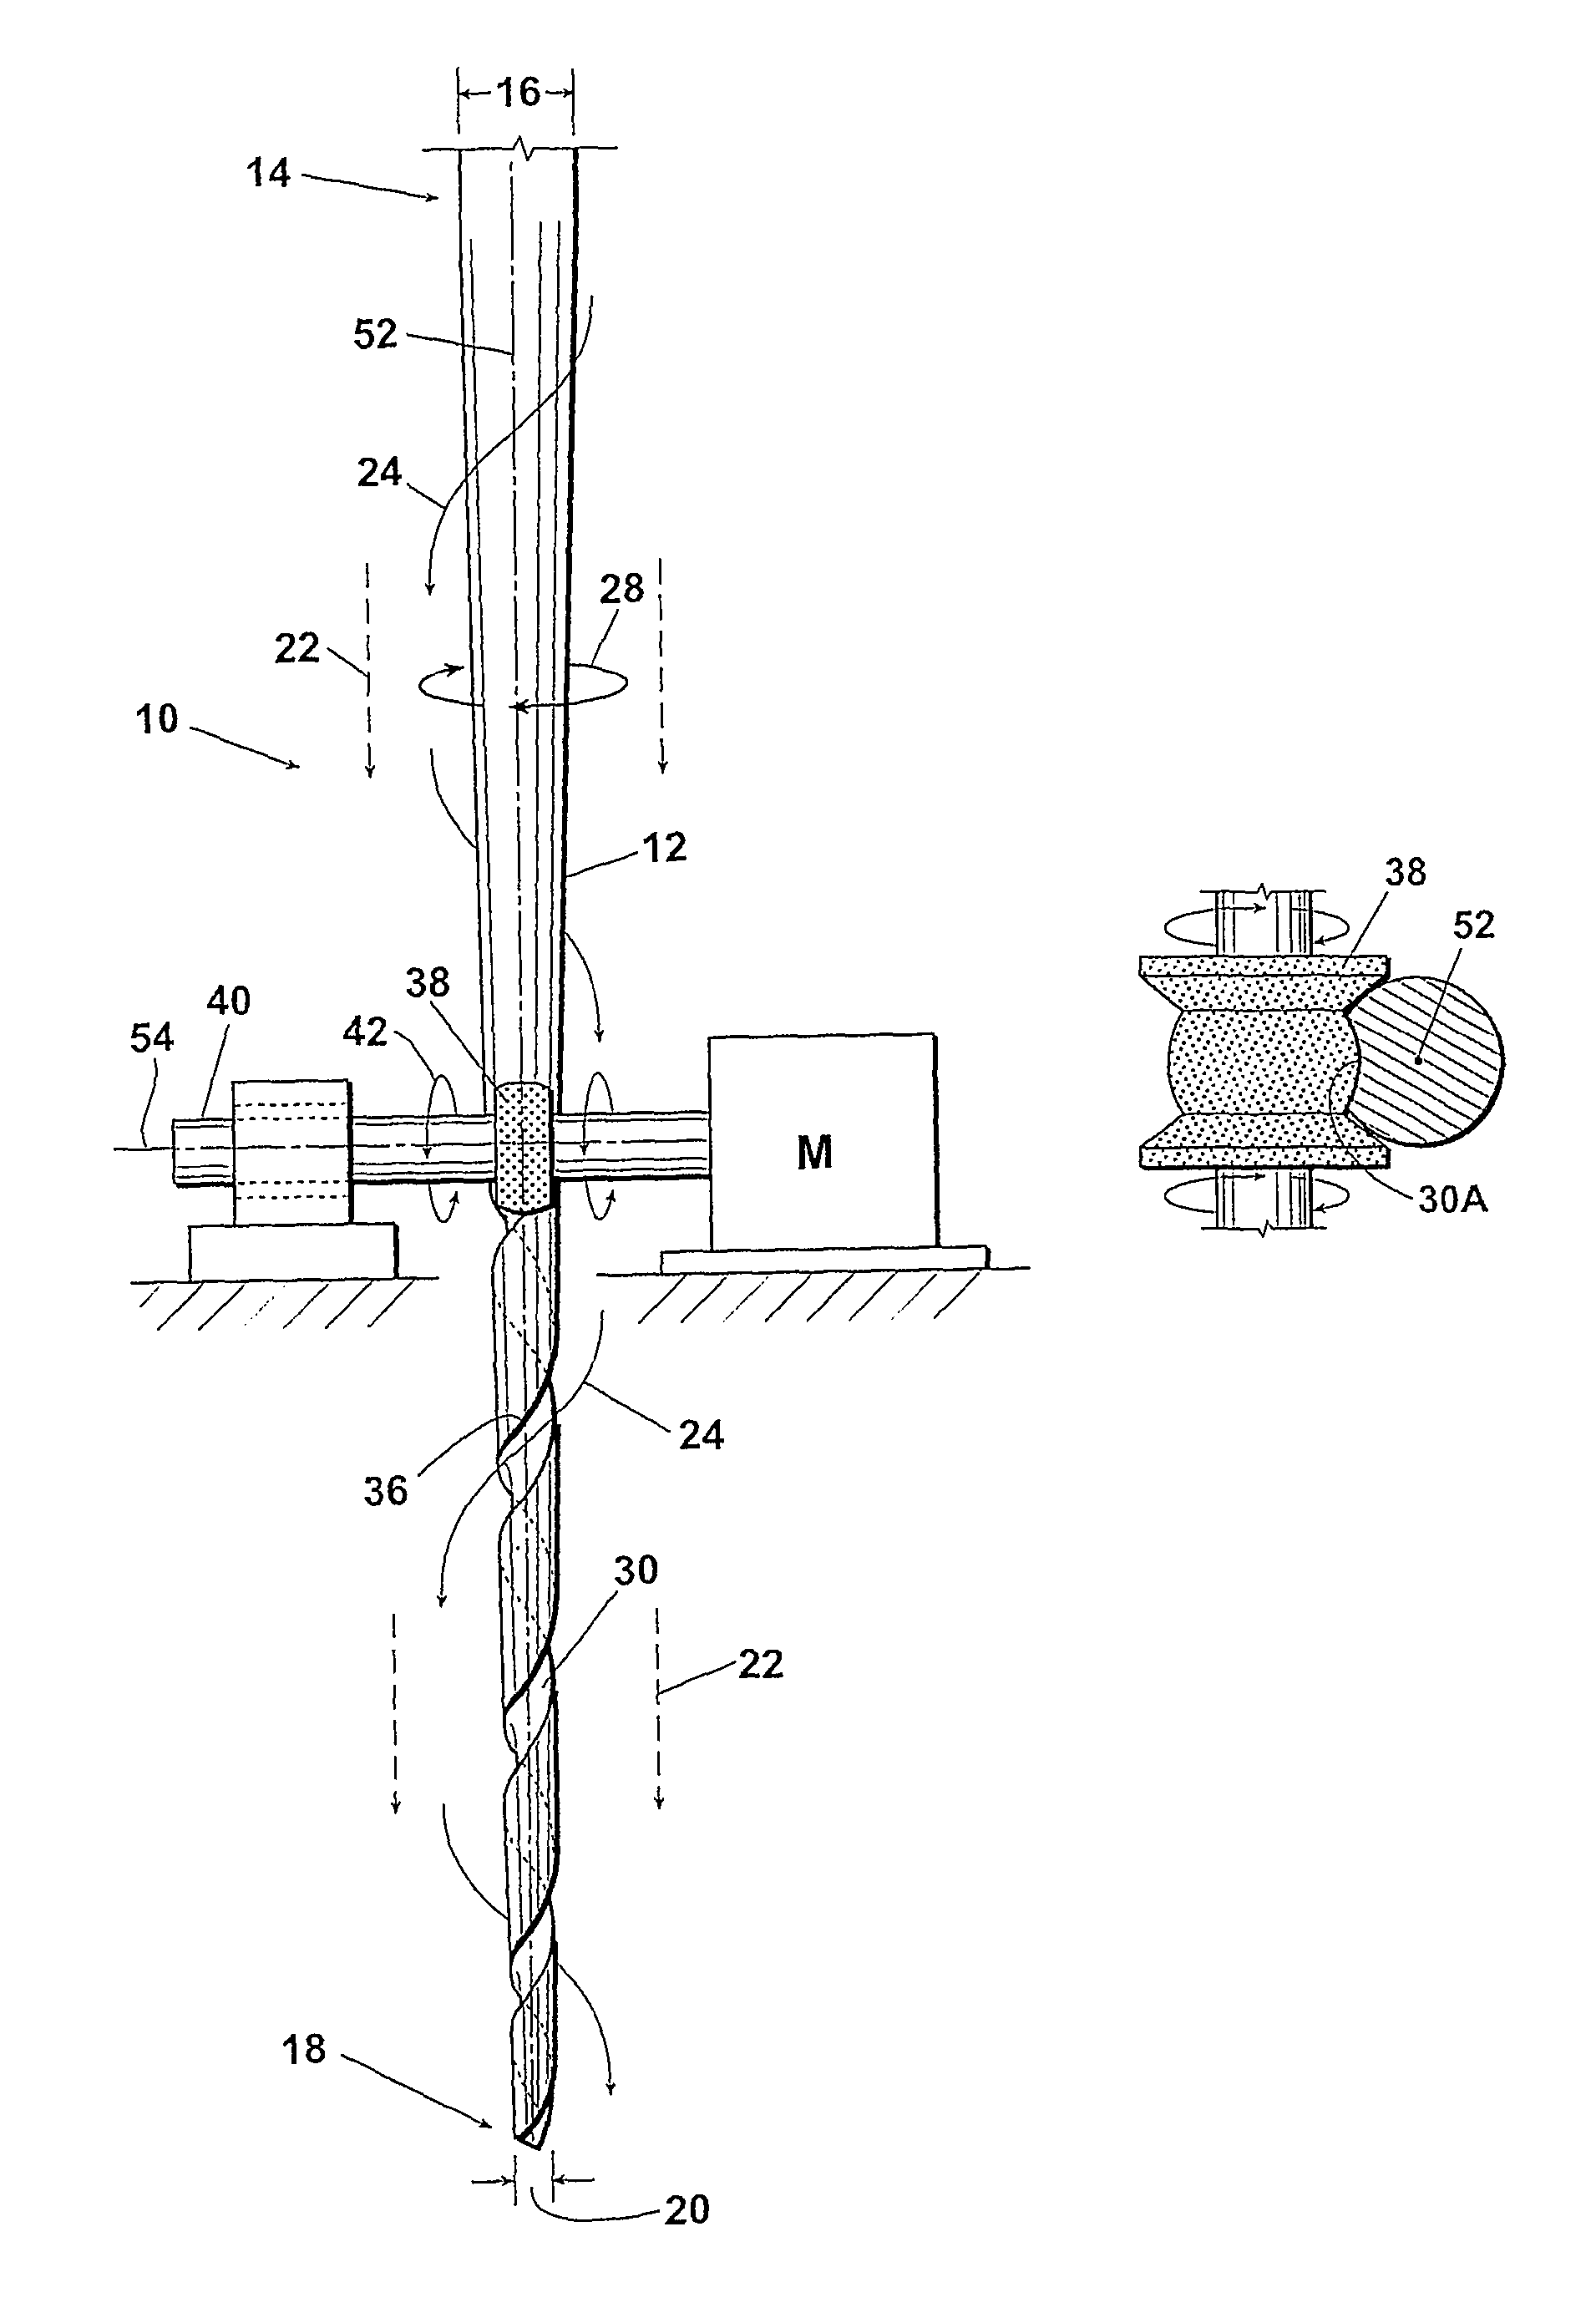 Longitudinally ground file having increased resistance to torsional and cyclic fatigue failure